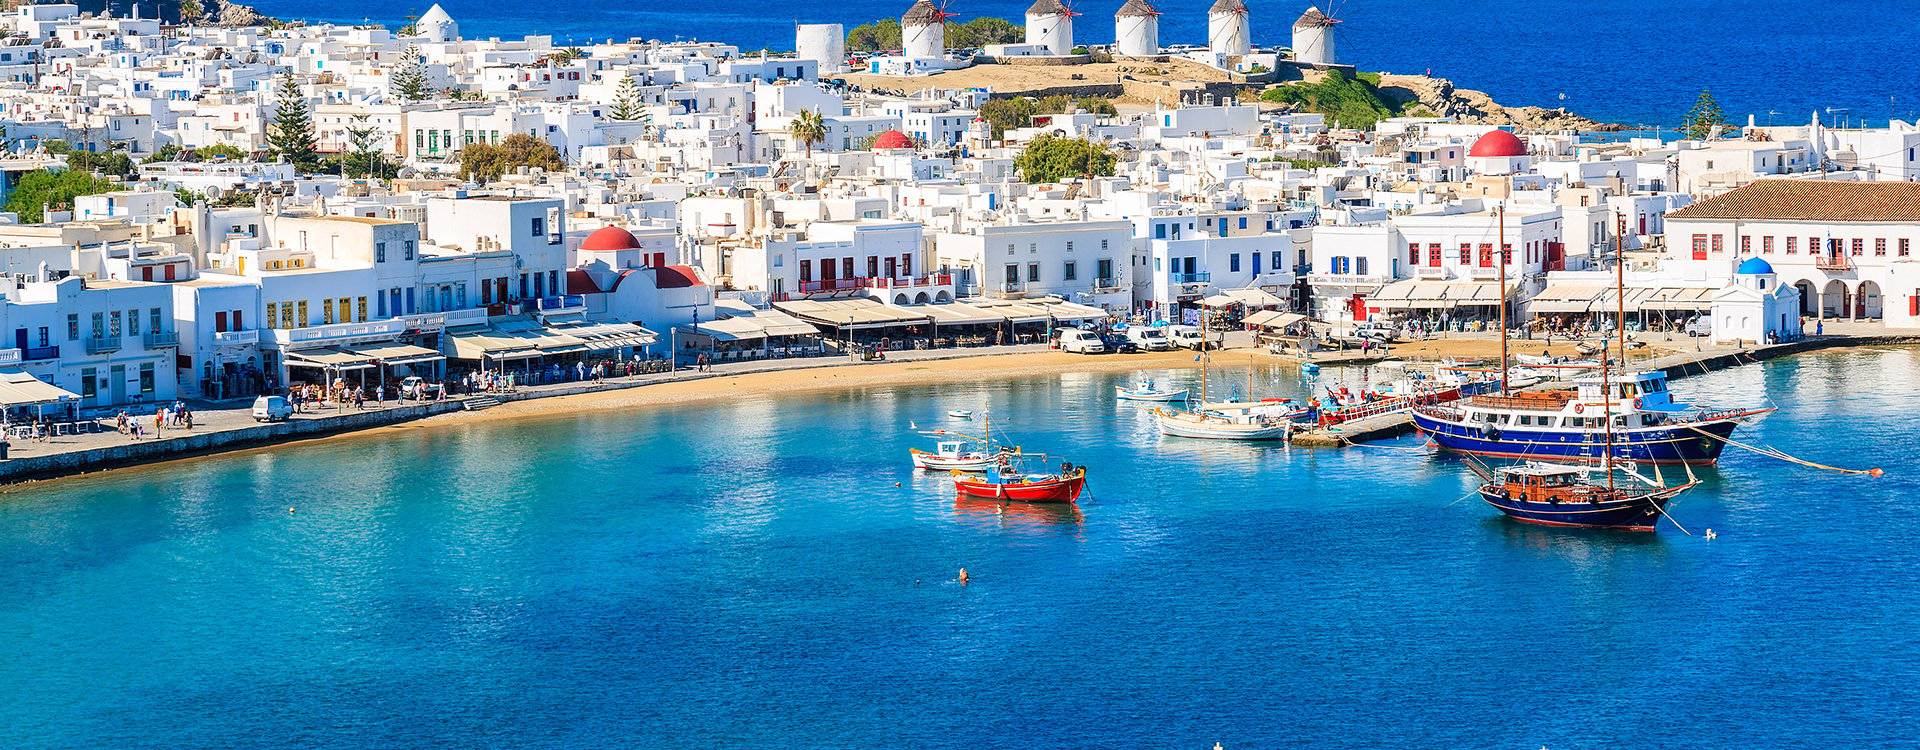 A view of Mykonos port with boats, Cyclades islands, Greece